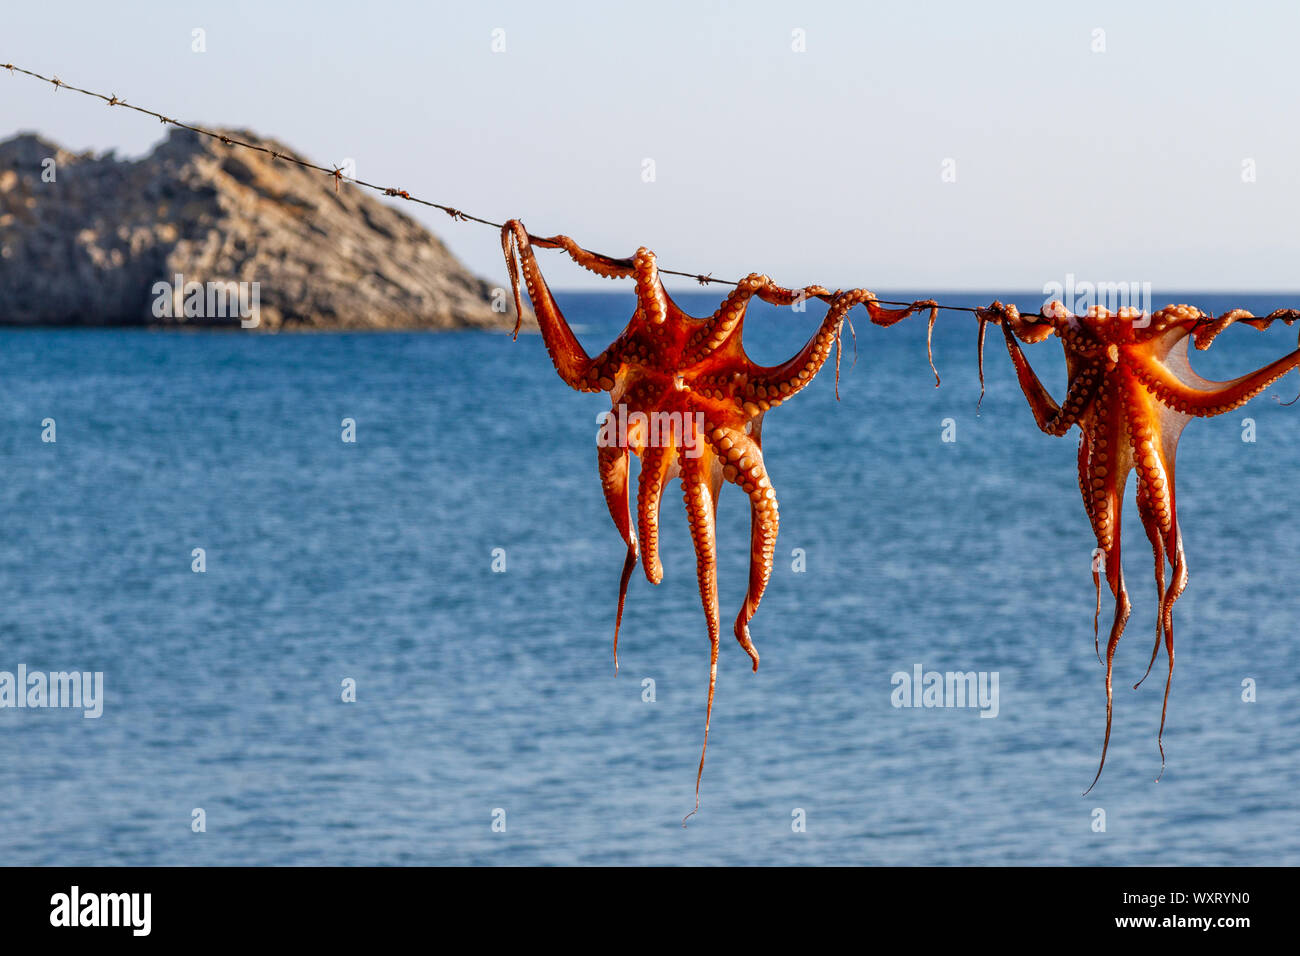 Octopuses ready to be cooked, in Skala Eressos village, Lesbos island, Greece, Europe. Stock Photo